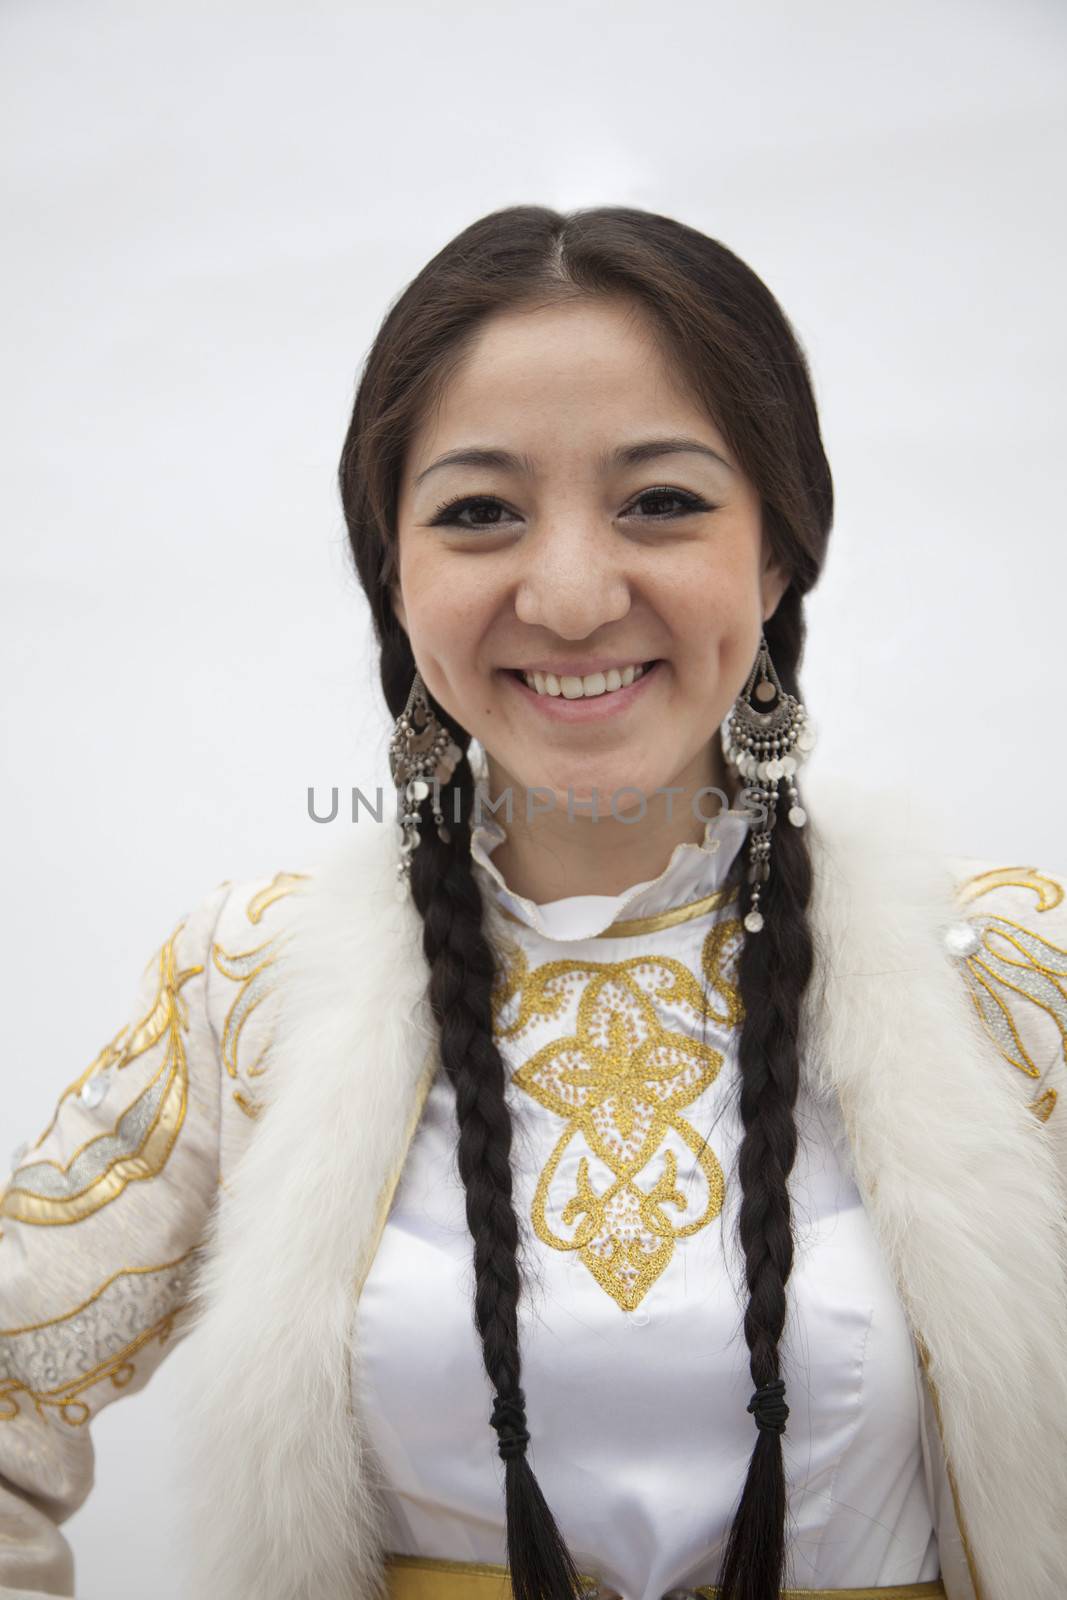 Portrait of young smiling woman with braids in traditional clothing from Kazakhstan, studio shot